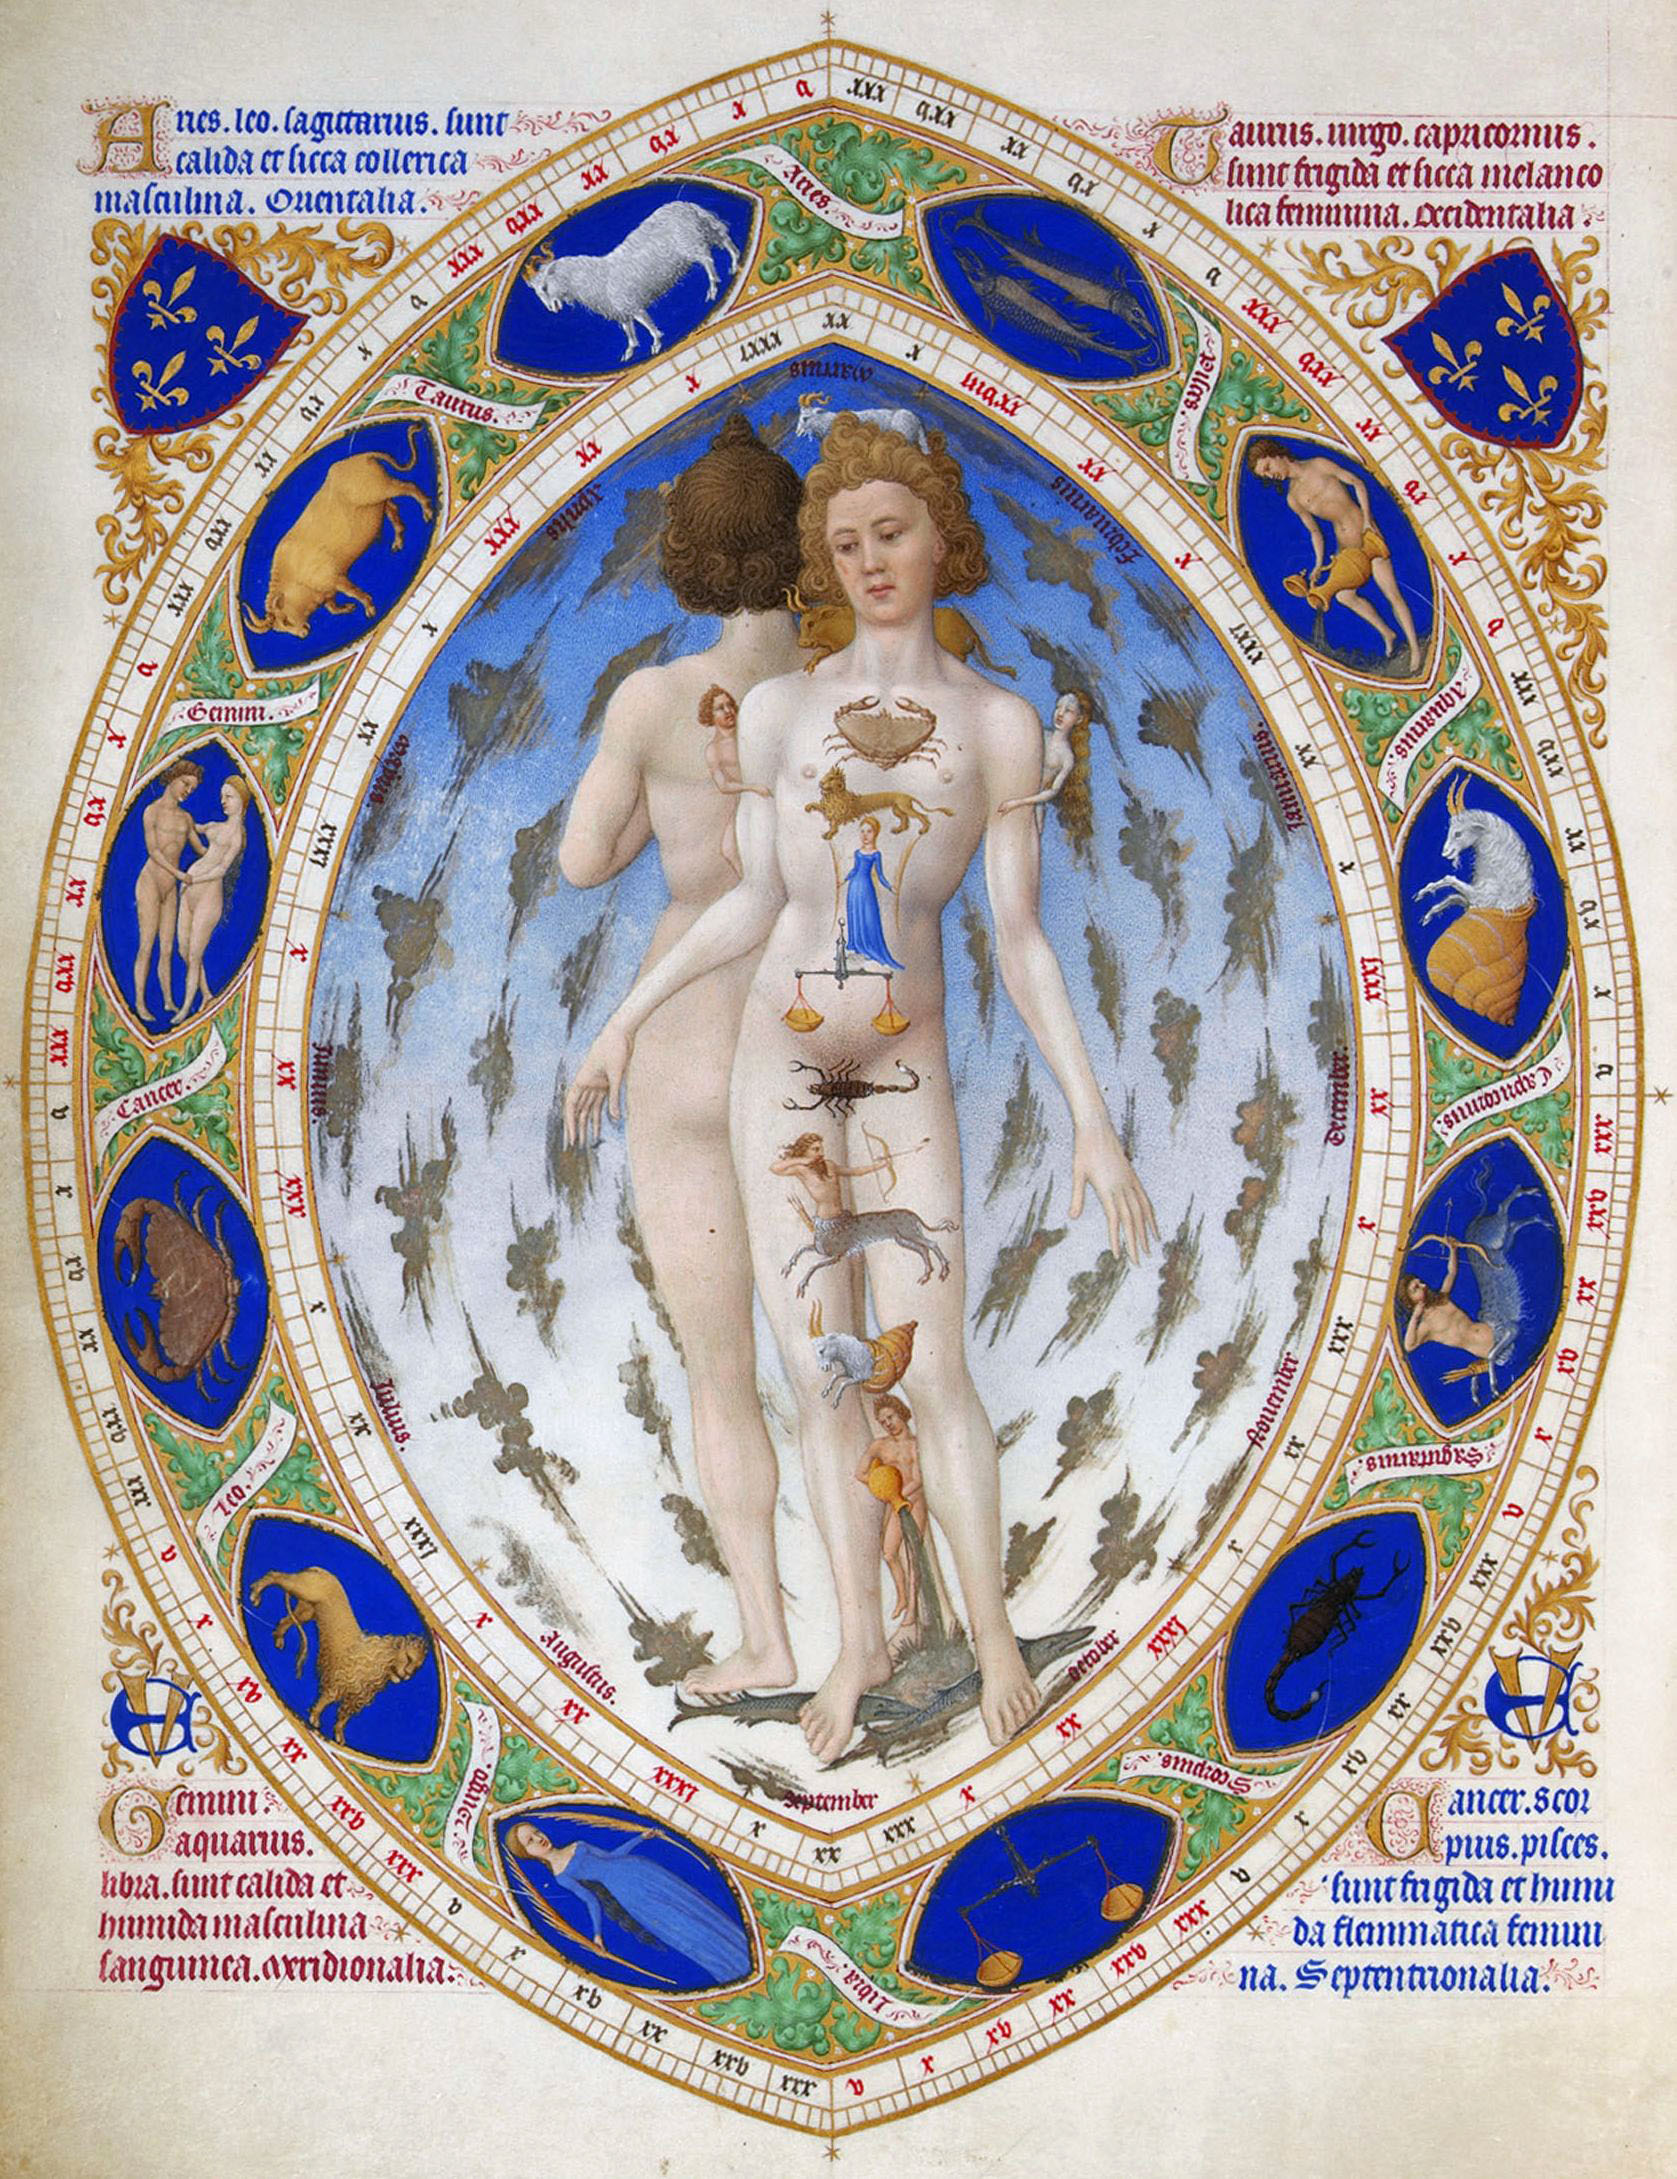 Herman, Paul and Jean de Limbourg, Zodiacal man, from Les Très Riches Heures du Duc de Berry, 1413-16, ink on vellum (Musée Condé, Chantilly). The image is divided by quadrants marked by Latin inscriptions describing the properties of each sign according to the four humors.